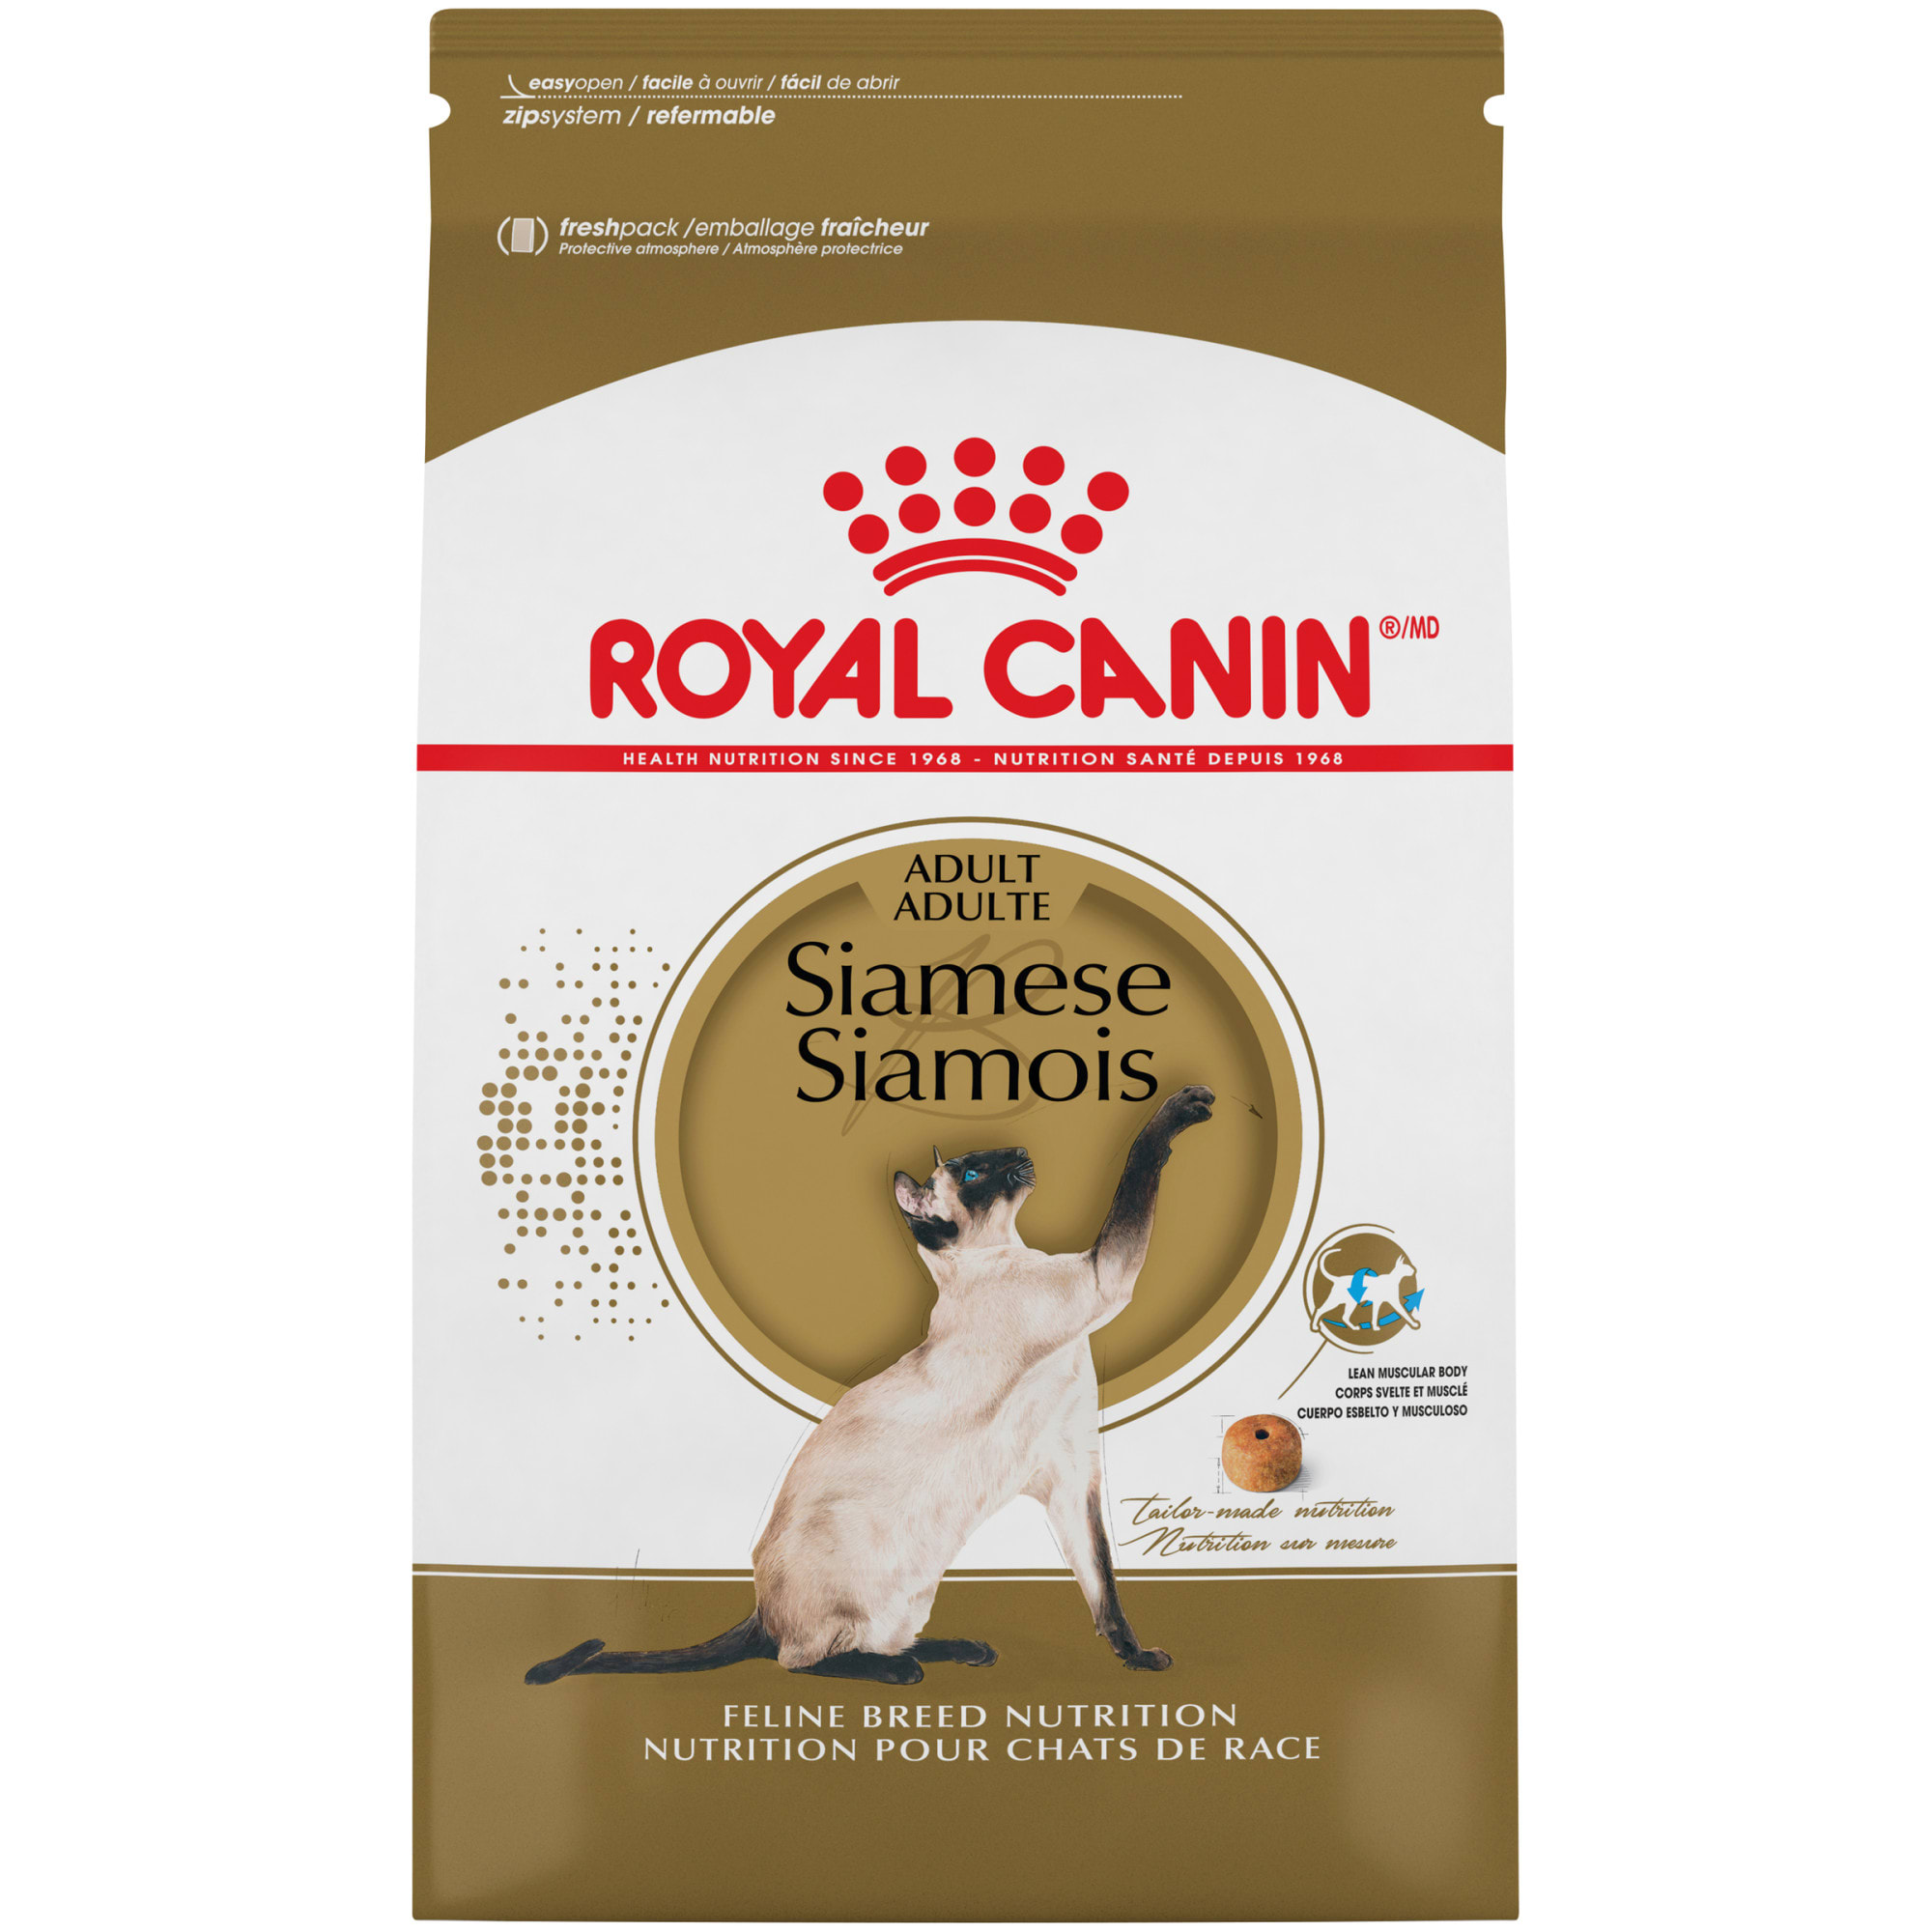 Royal Canin Siamese Breed Adult Dry Cat Food, 6 lbs. Petco